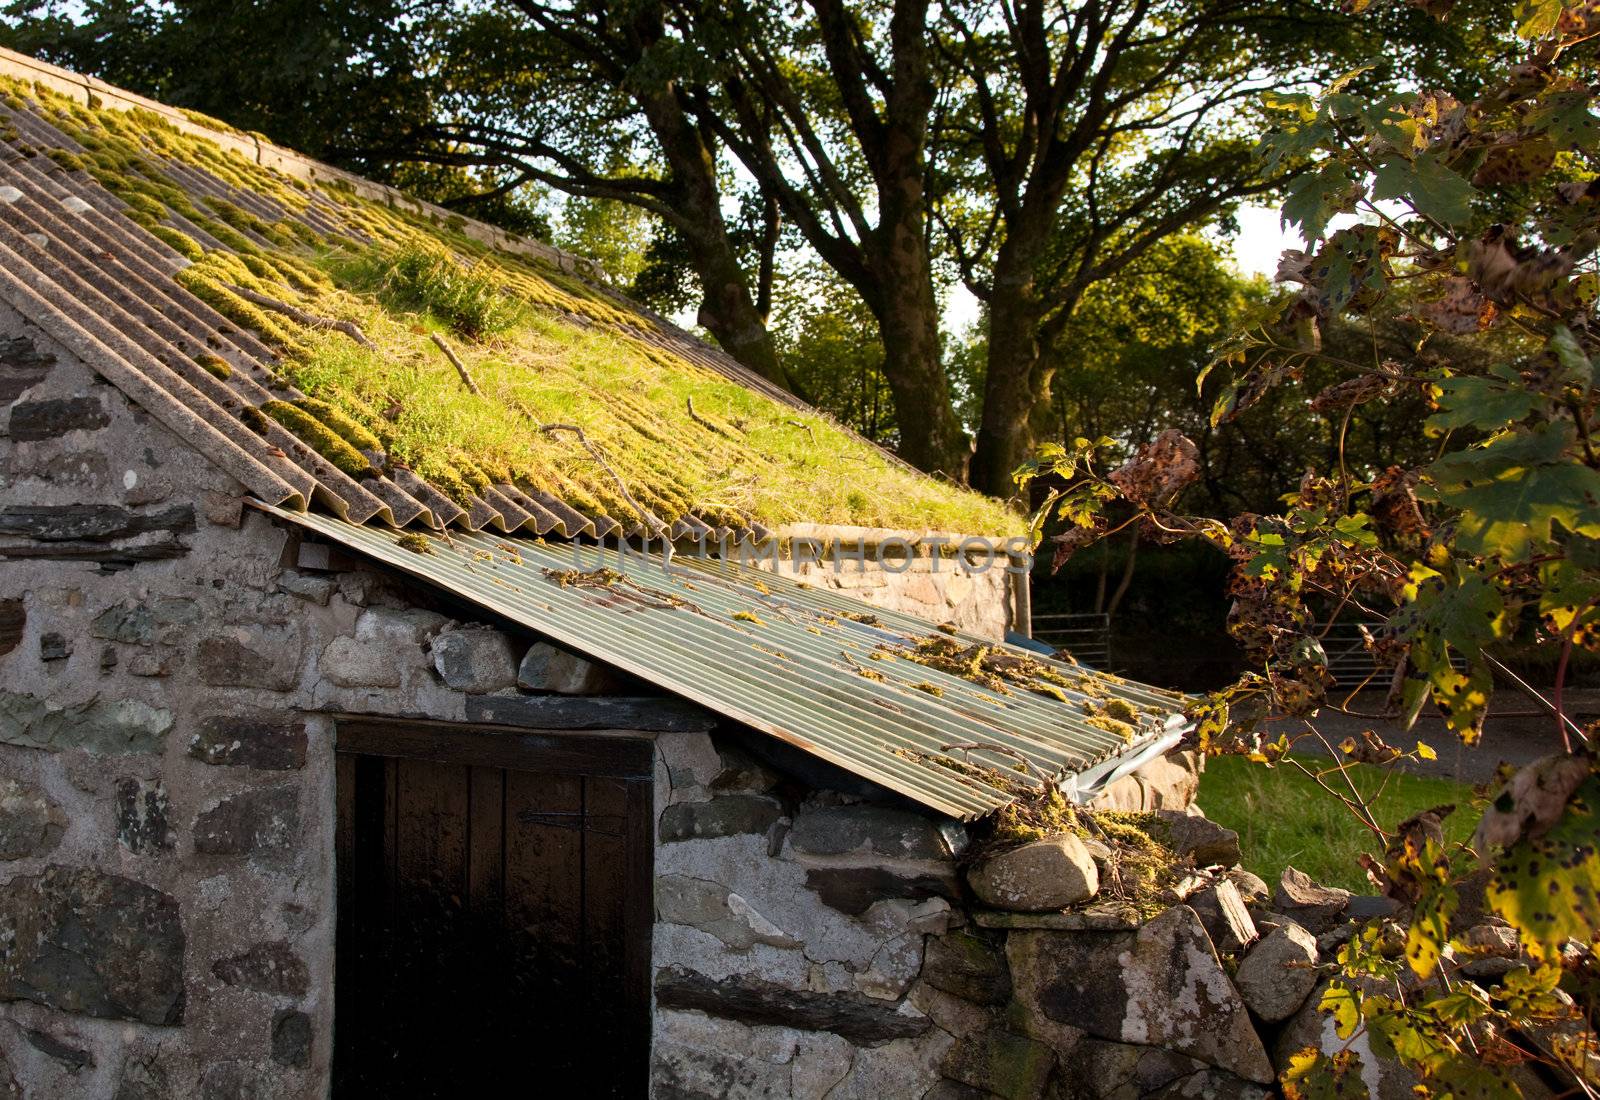 Lean-to building on old Welsh mountain farm with mossy roof